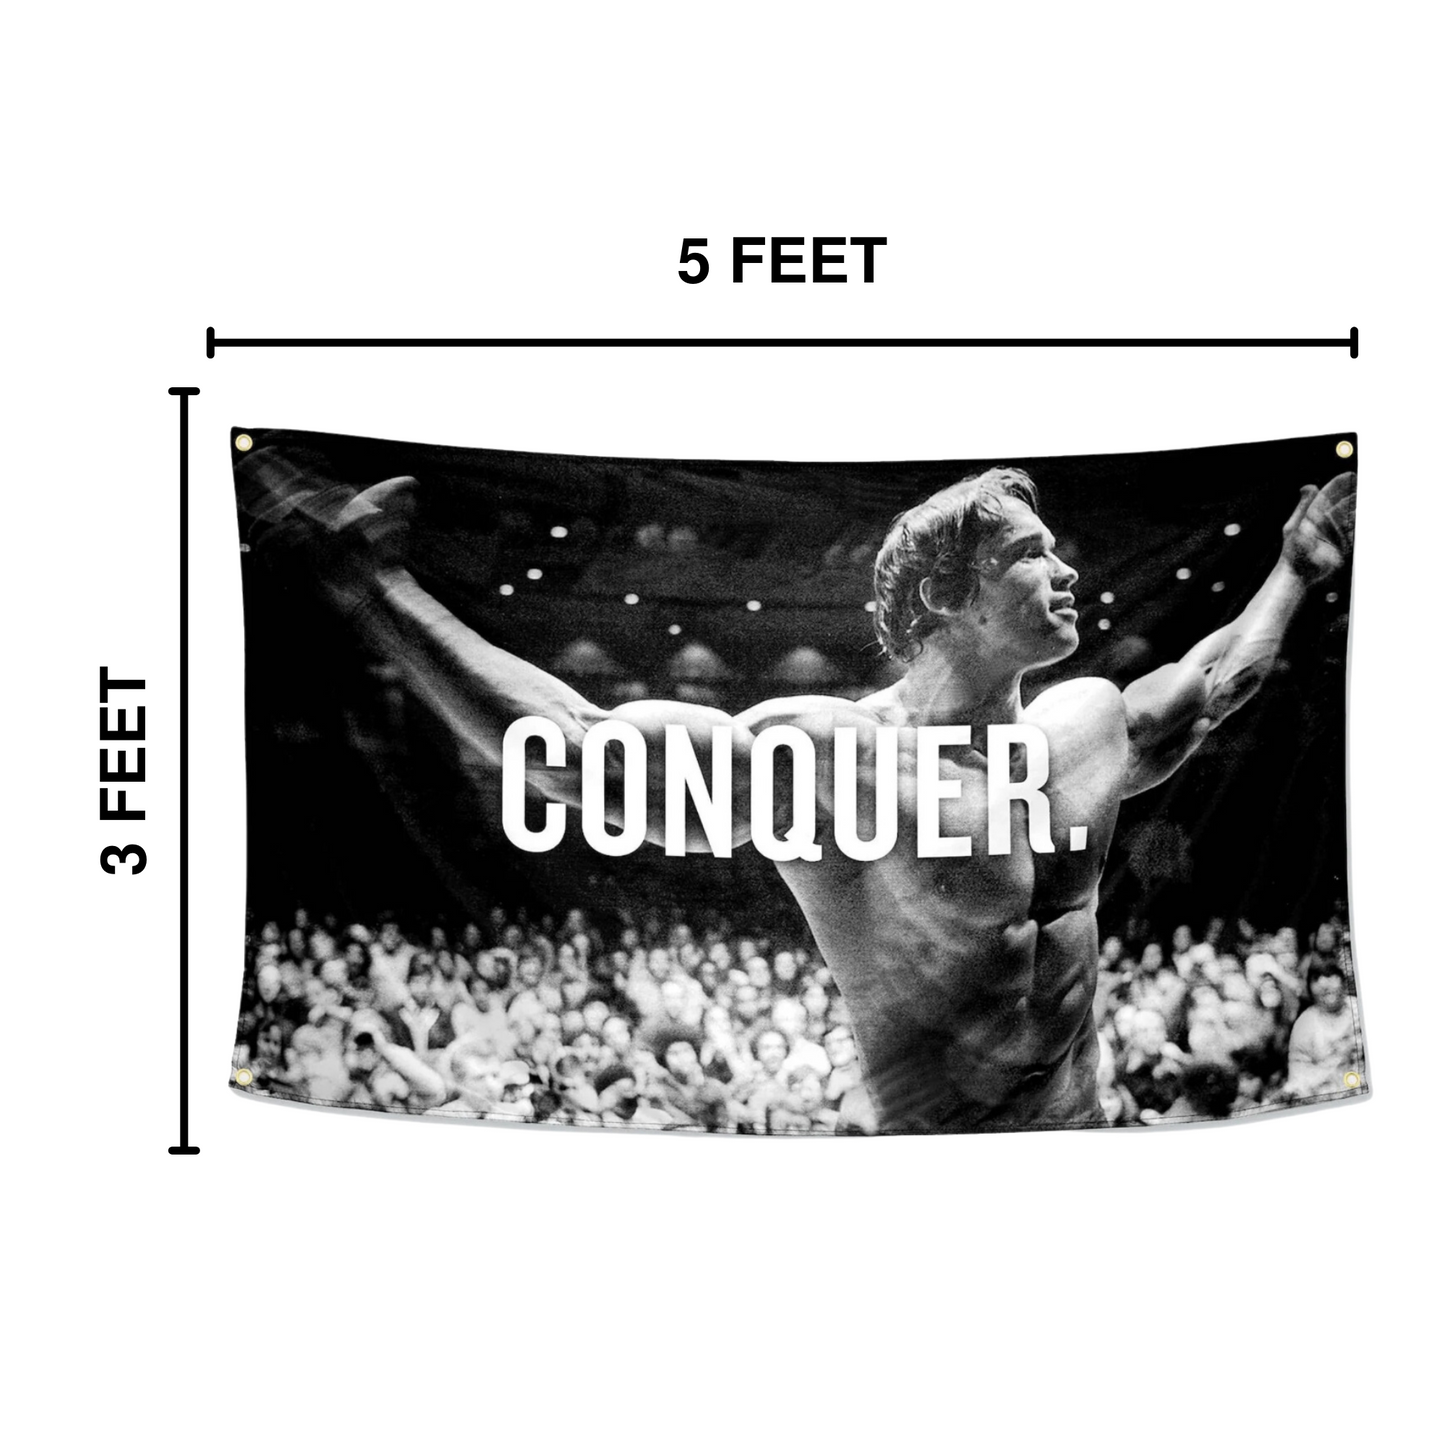 Motivational 'Conquer' flag featuring Arnold Schwarzenegger, perfect for gym and home office decor